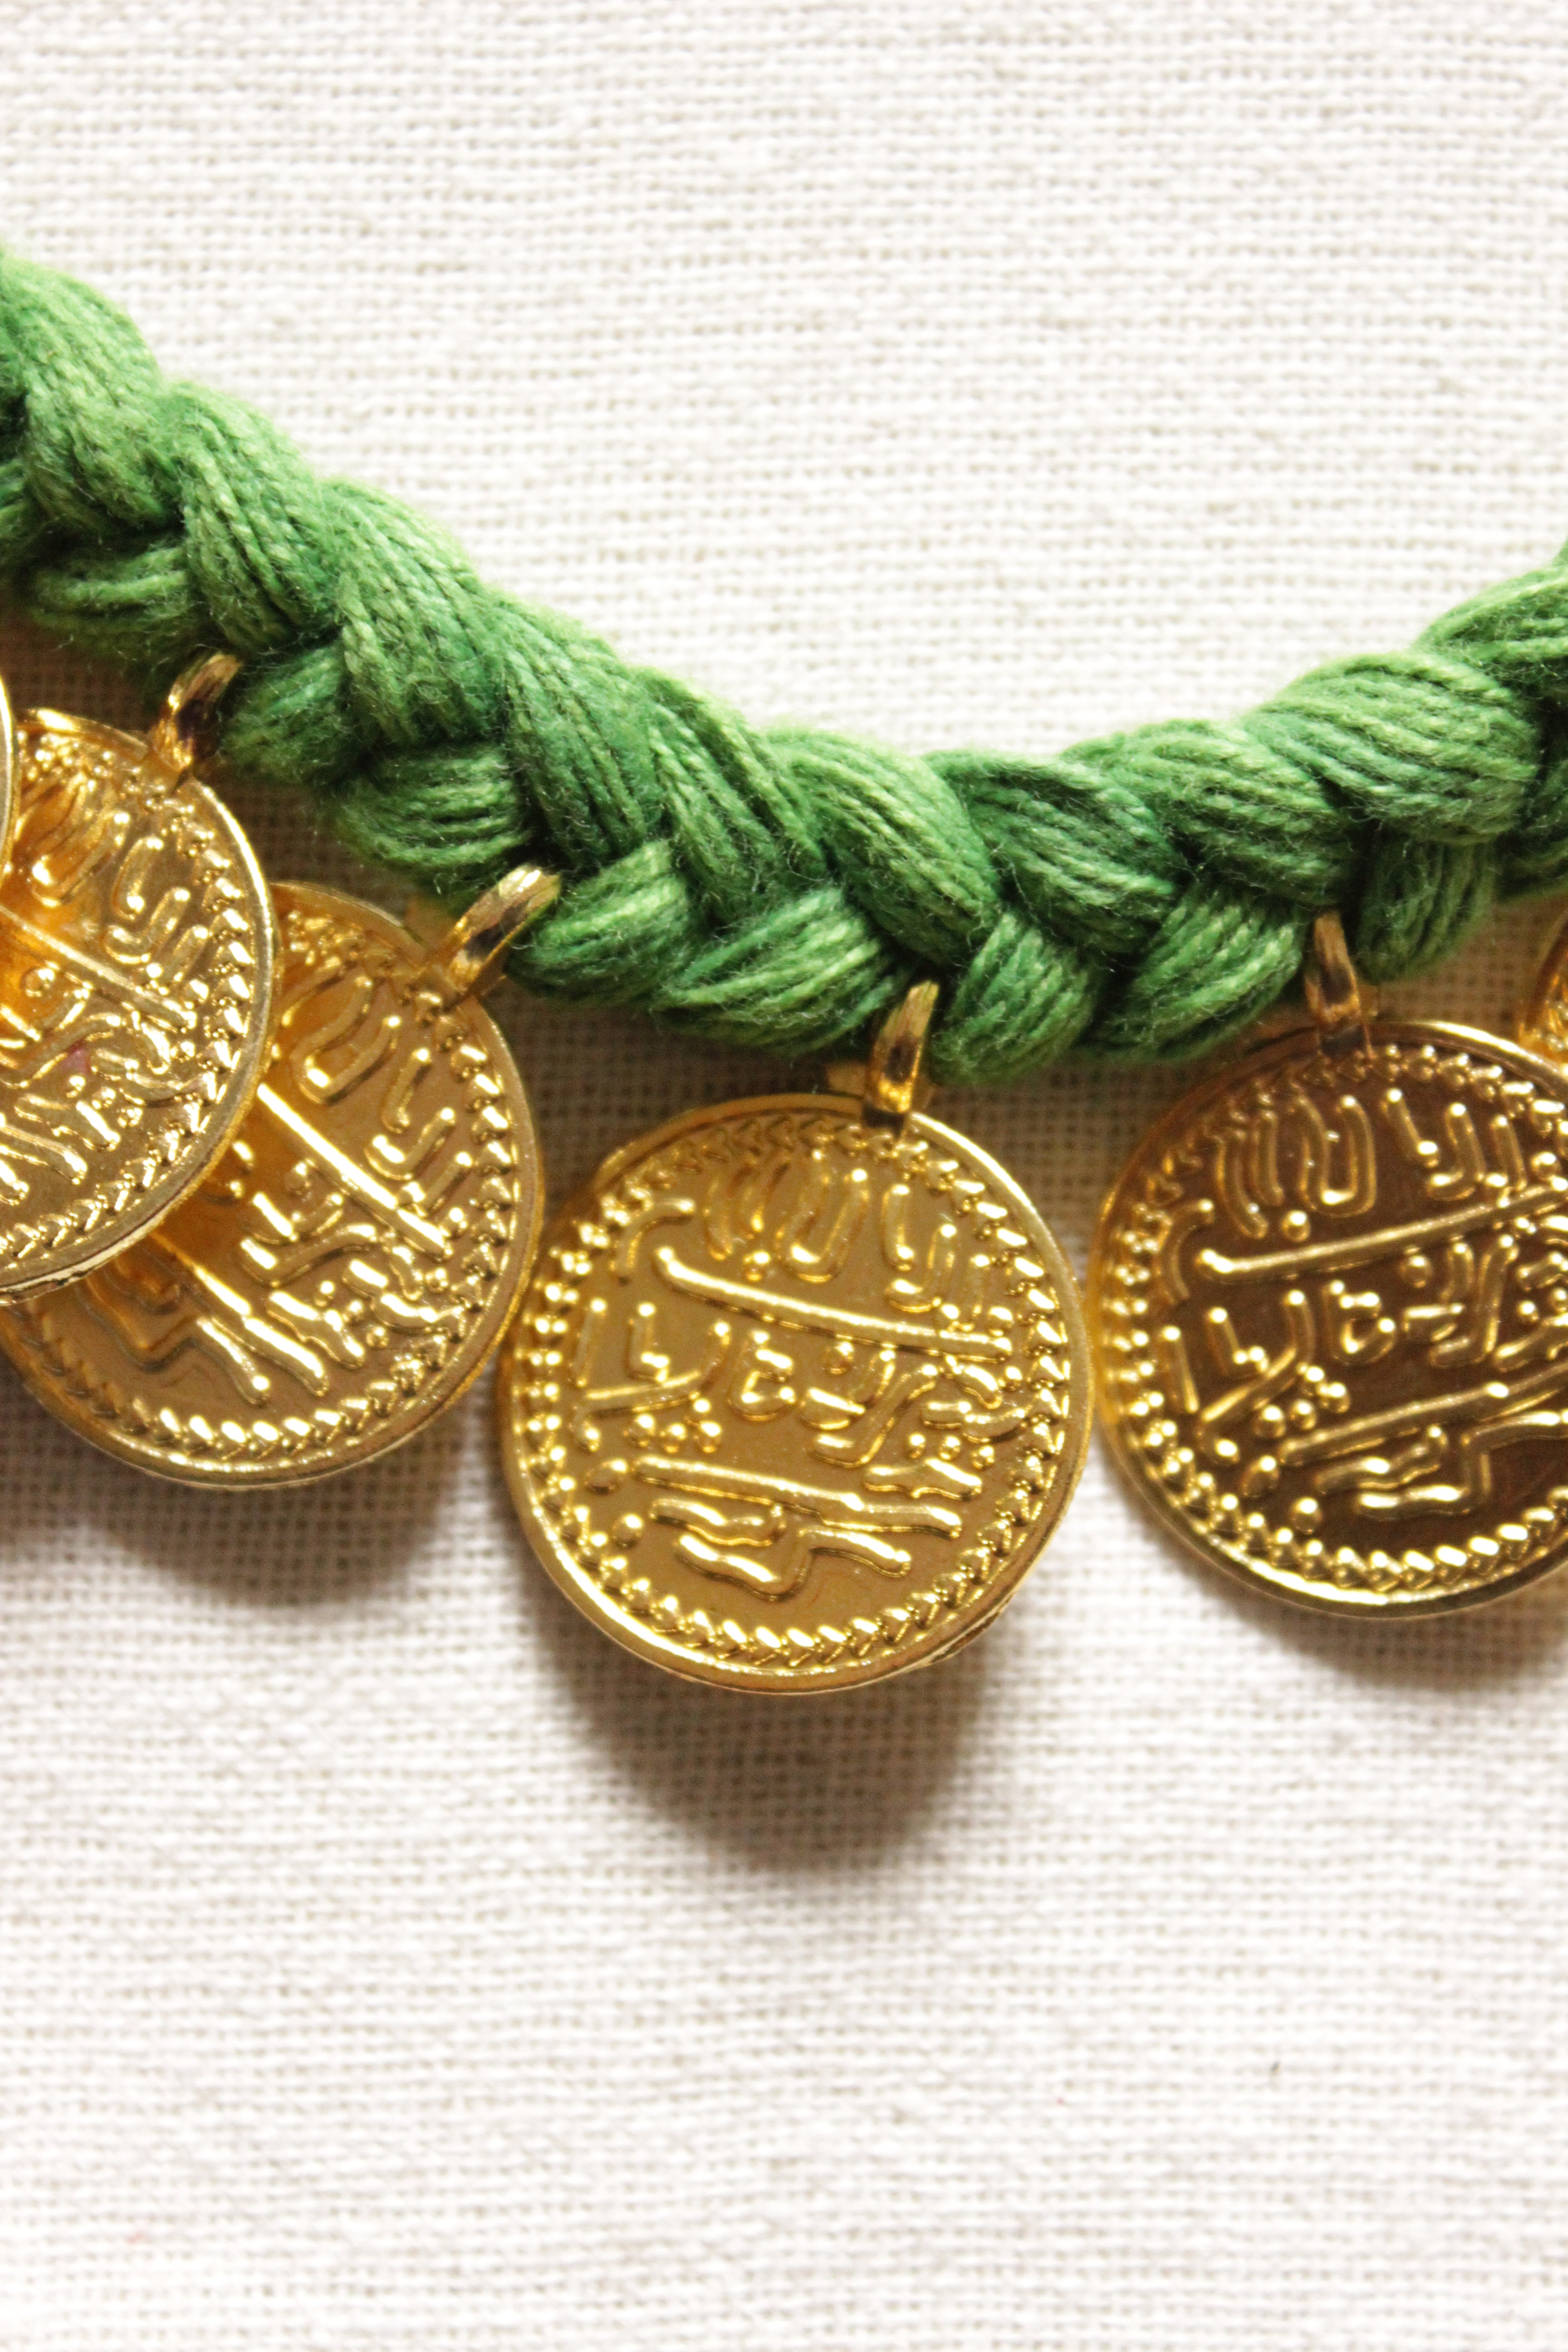 Gold Embossed Coins Braided in Green Threads Fabric Necklace